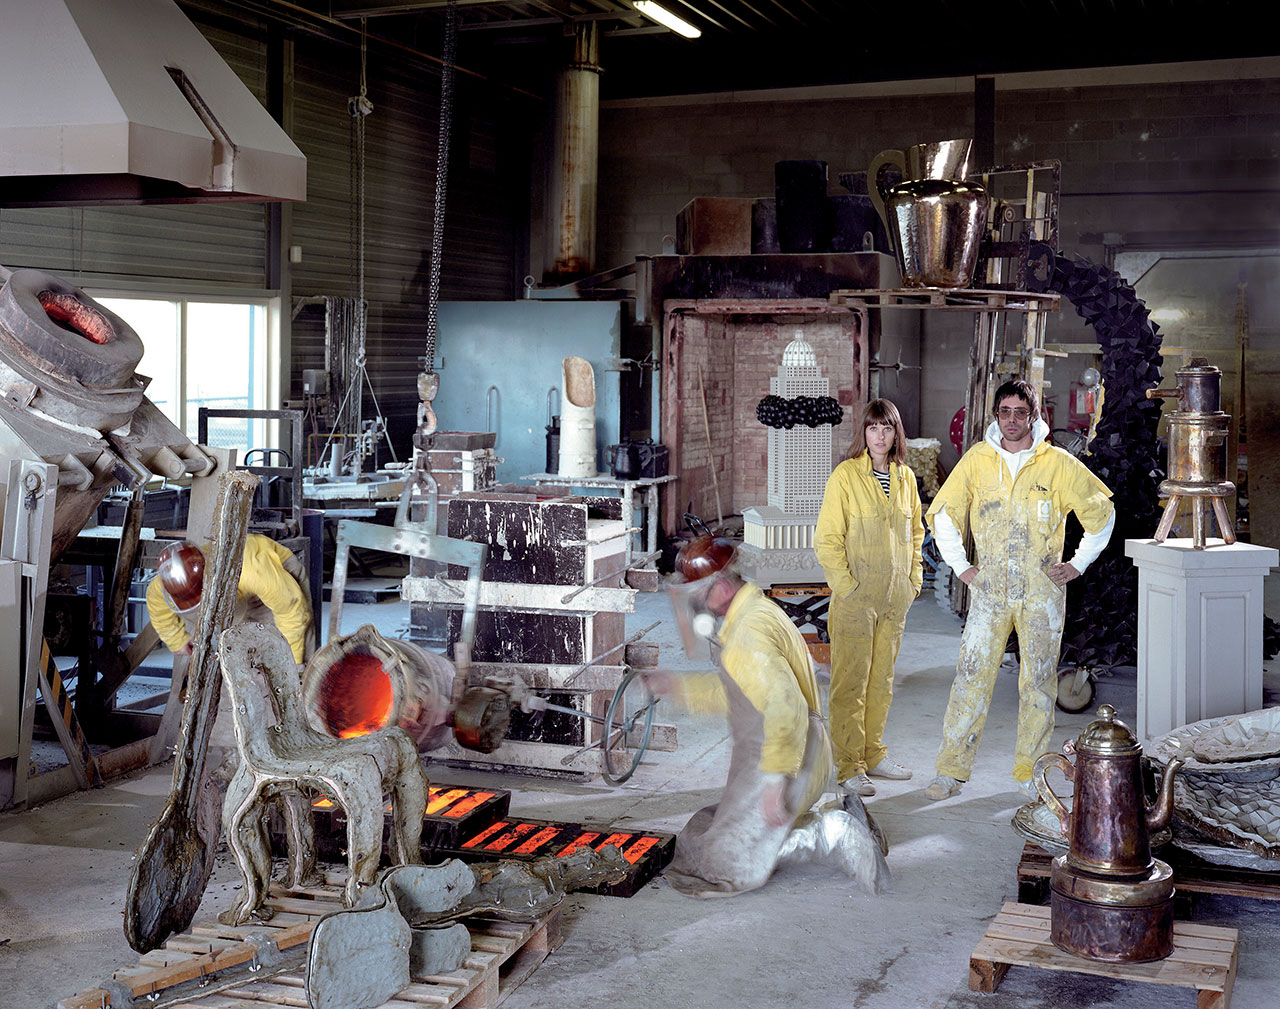 Job Smeets and Nynke Tynagel in foundry. Photo by Daniel Stier.